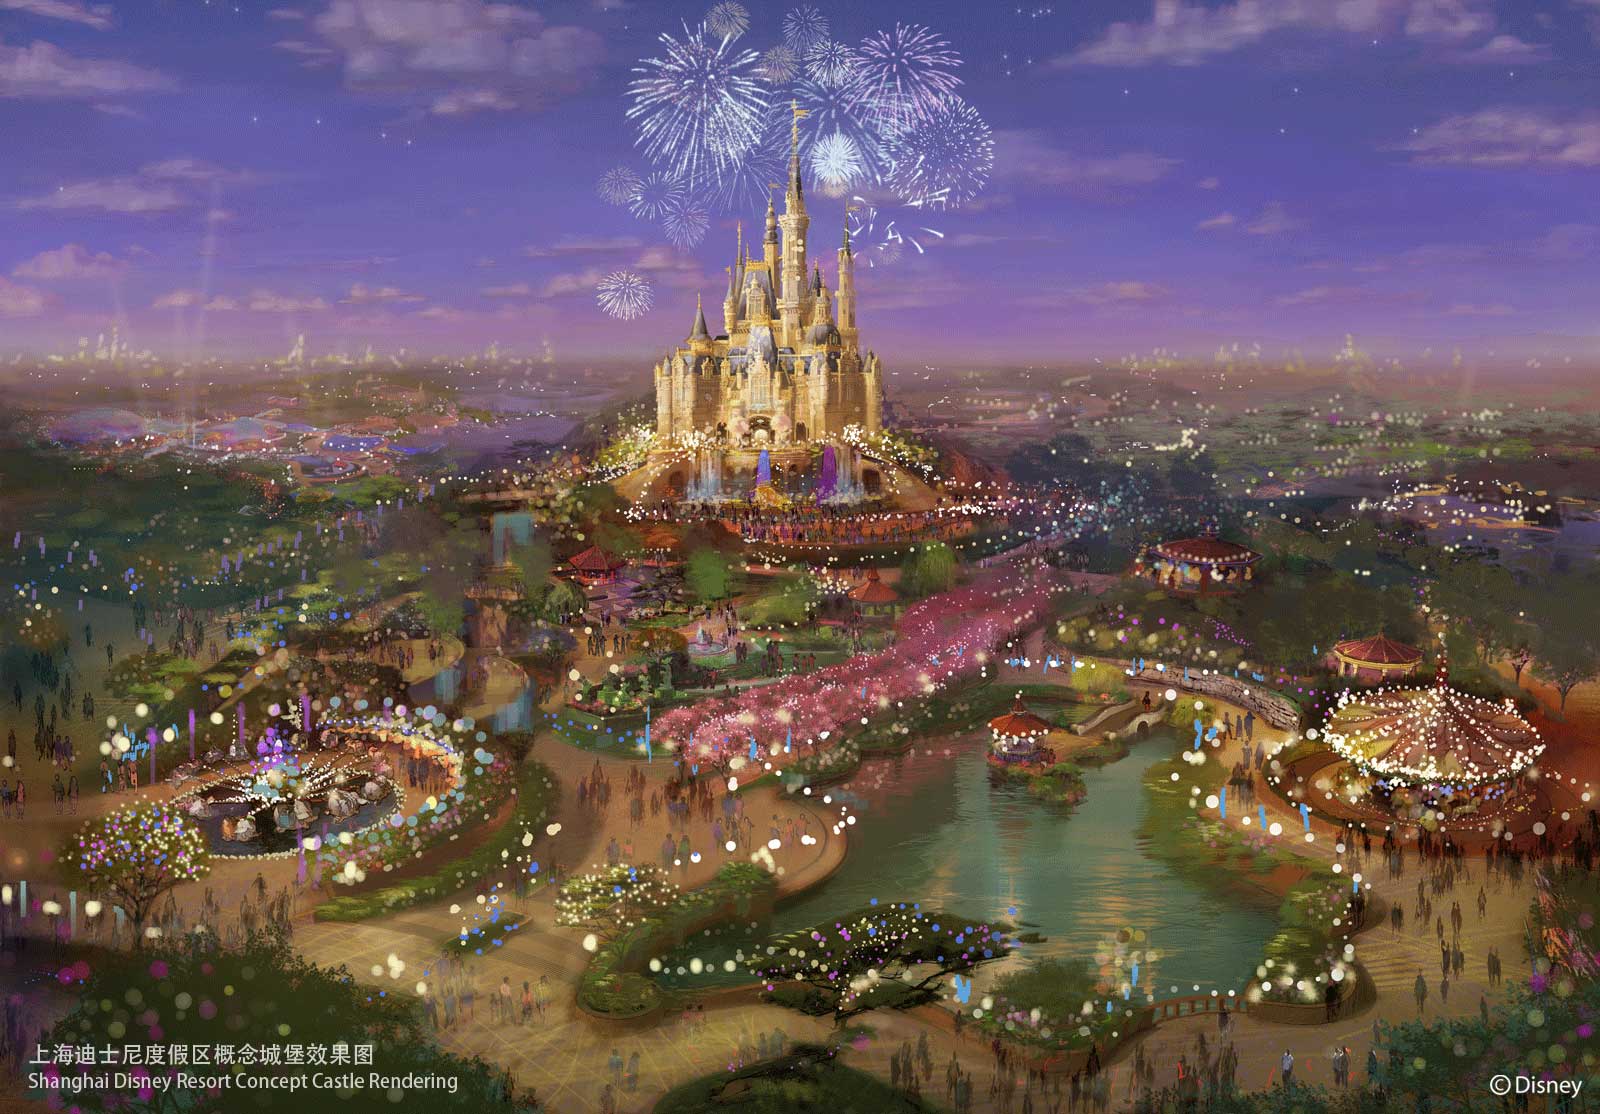 Shanghai Disneyland to receive further $800m from investors